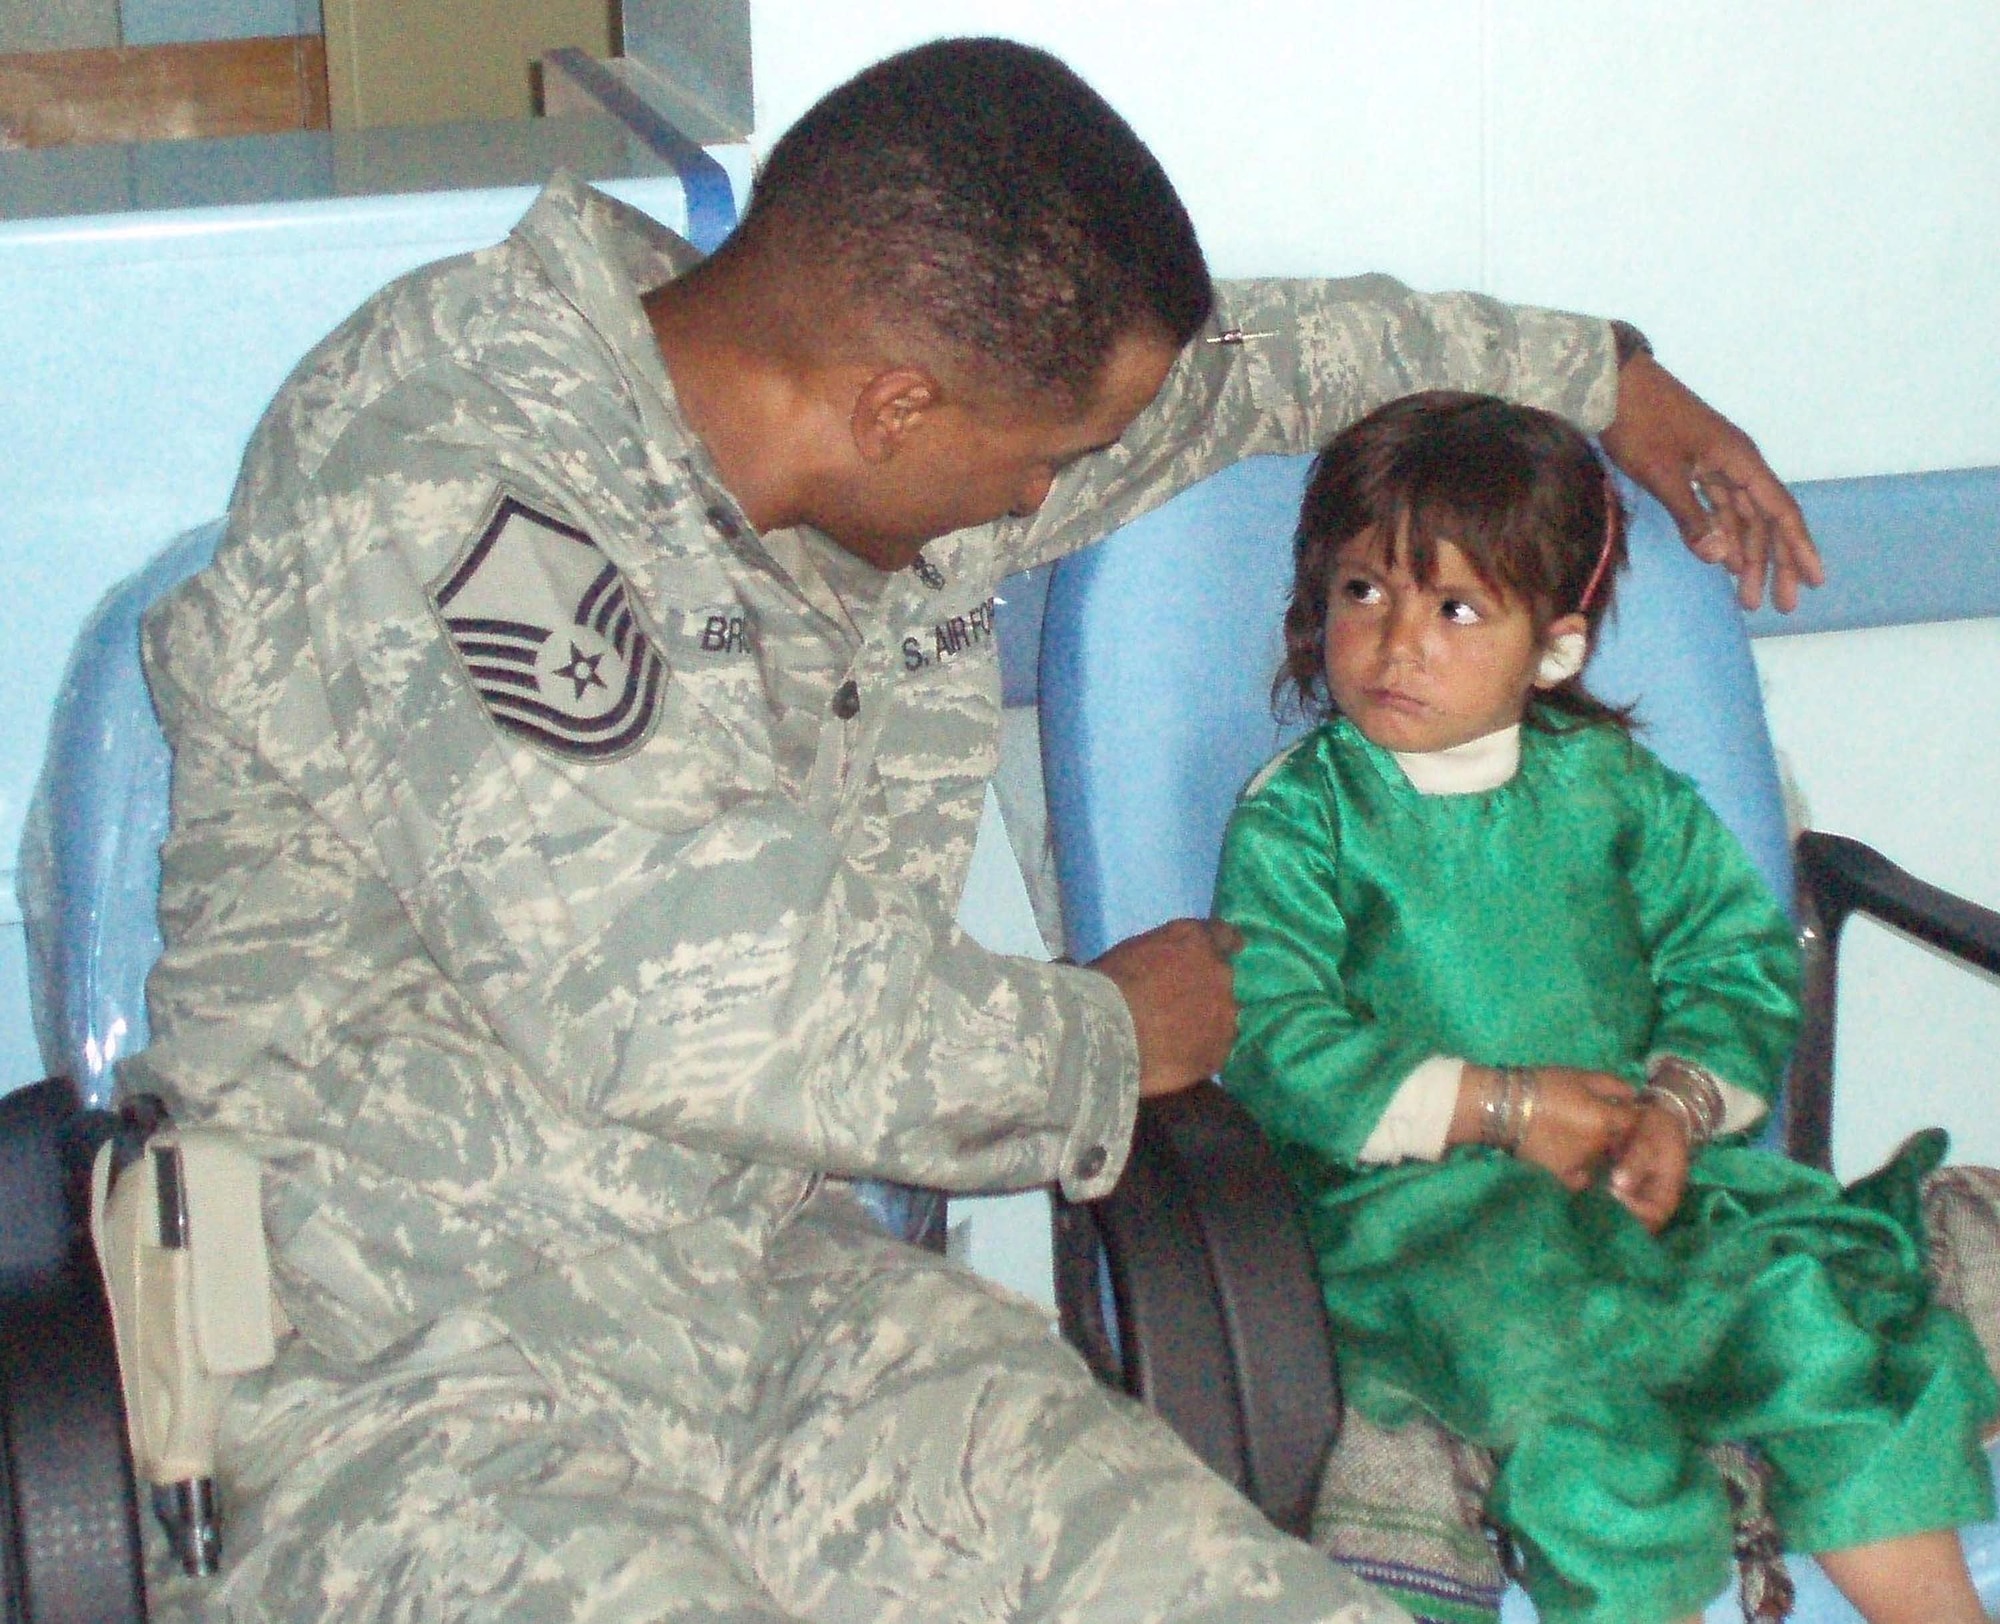 Master Sgt. Dewane Brown, Medical Embedded Training Team mentor deployed to Afghanistan from Ellsworth, comforts an Afghani girl suffering from an ear infection. Sergeant Brown is part of a team of specialists working to bring modern medical technology and capabilities to the Afghan people. (Courtesy photo)